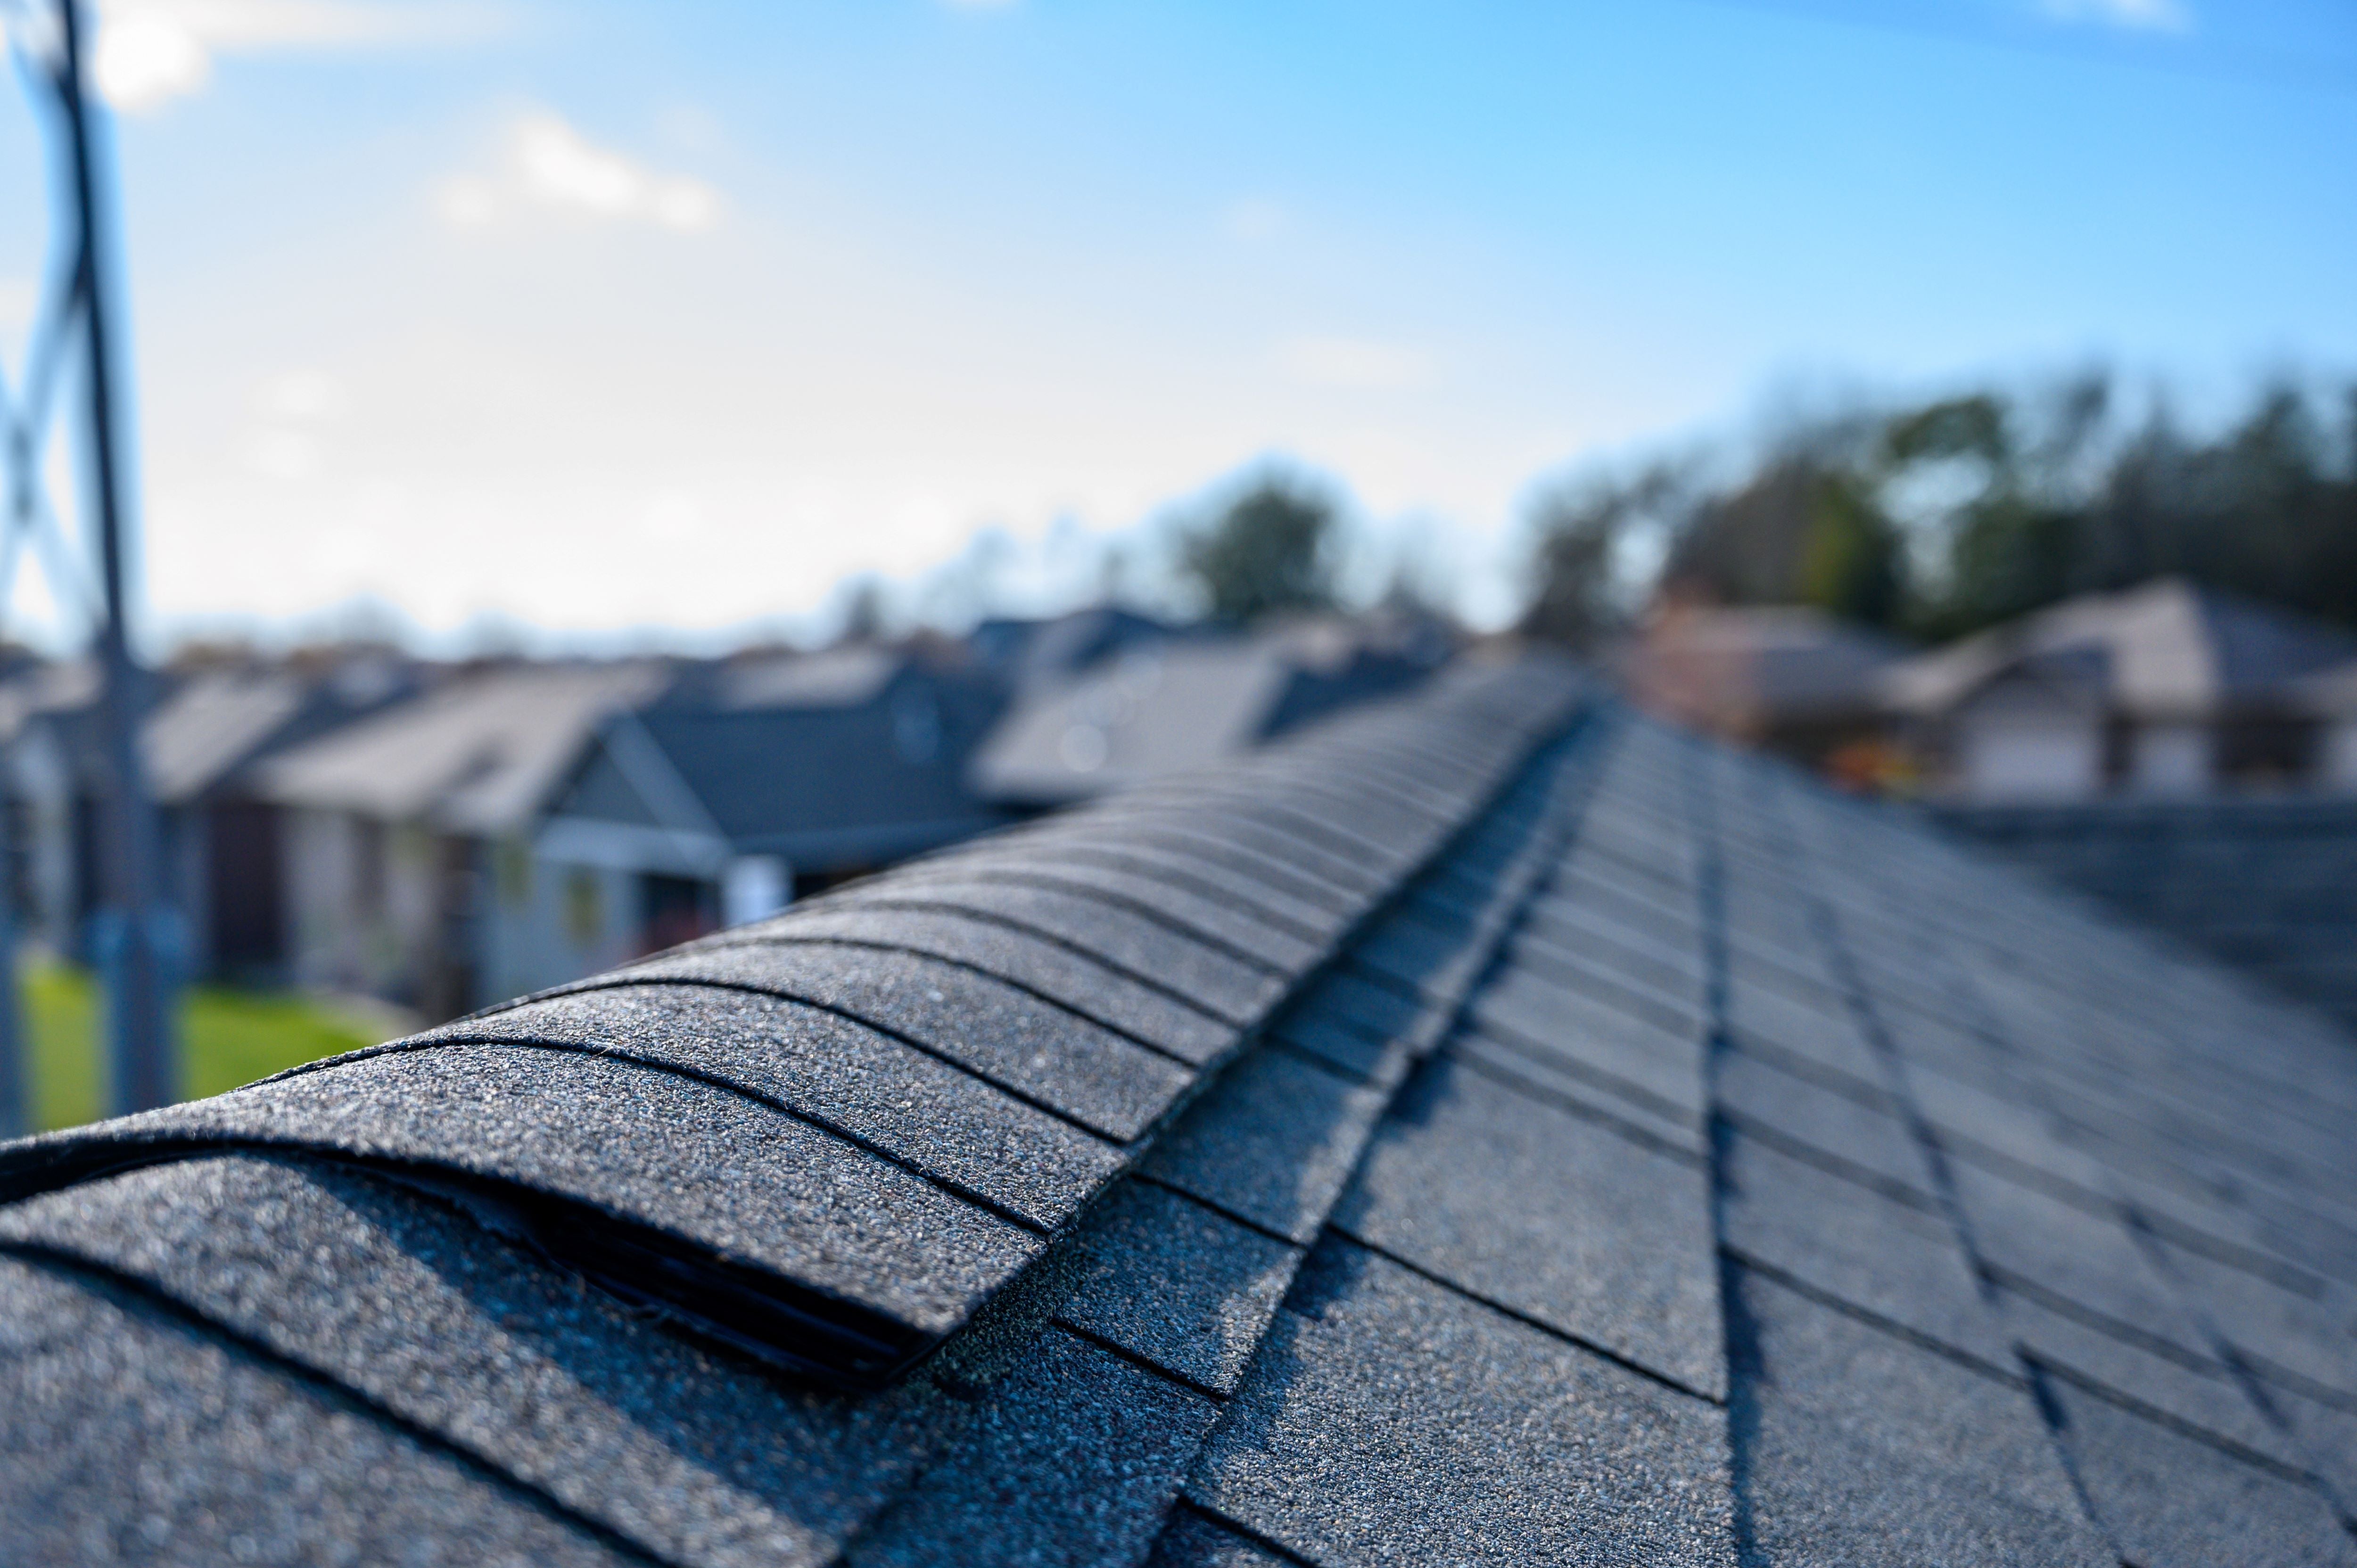 Home roof, with Shingles to check after winter for any damage in preparation for spring and summer